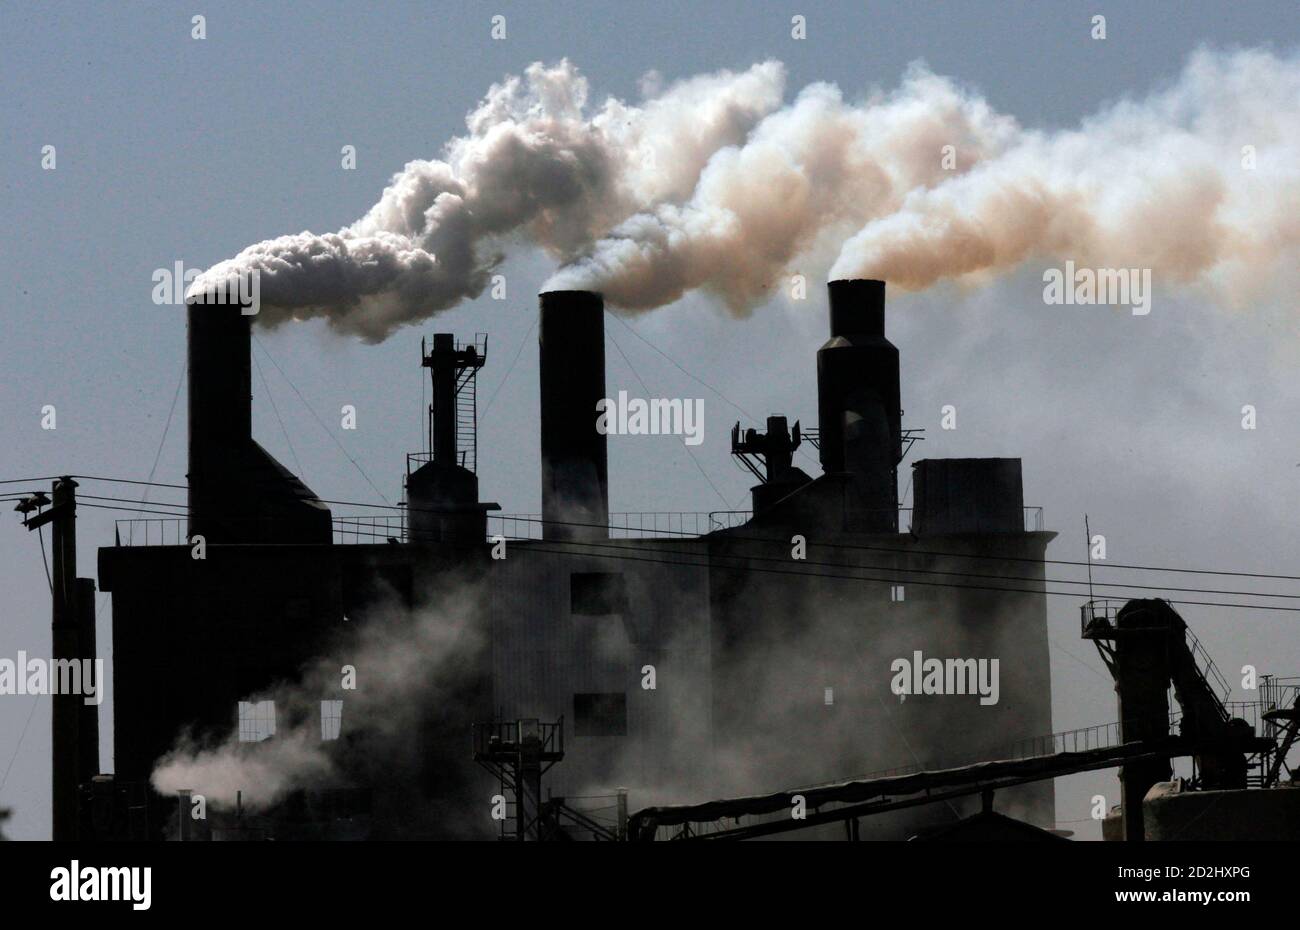 Smoke billows from a factory on the outskirts of Shenyang, northeast China's Liaoning province, May 4, 2007. Climate experts agreed on a U.N. report on Friday that said fighting global warming is affordable and the technology available to slow the growth in greenhouse gas emissions and stave off climate chaos, a senior delegate said.  REUTERS/Stringer  (CHINA) Stock Photo